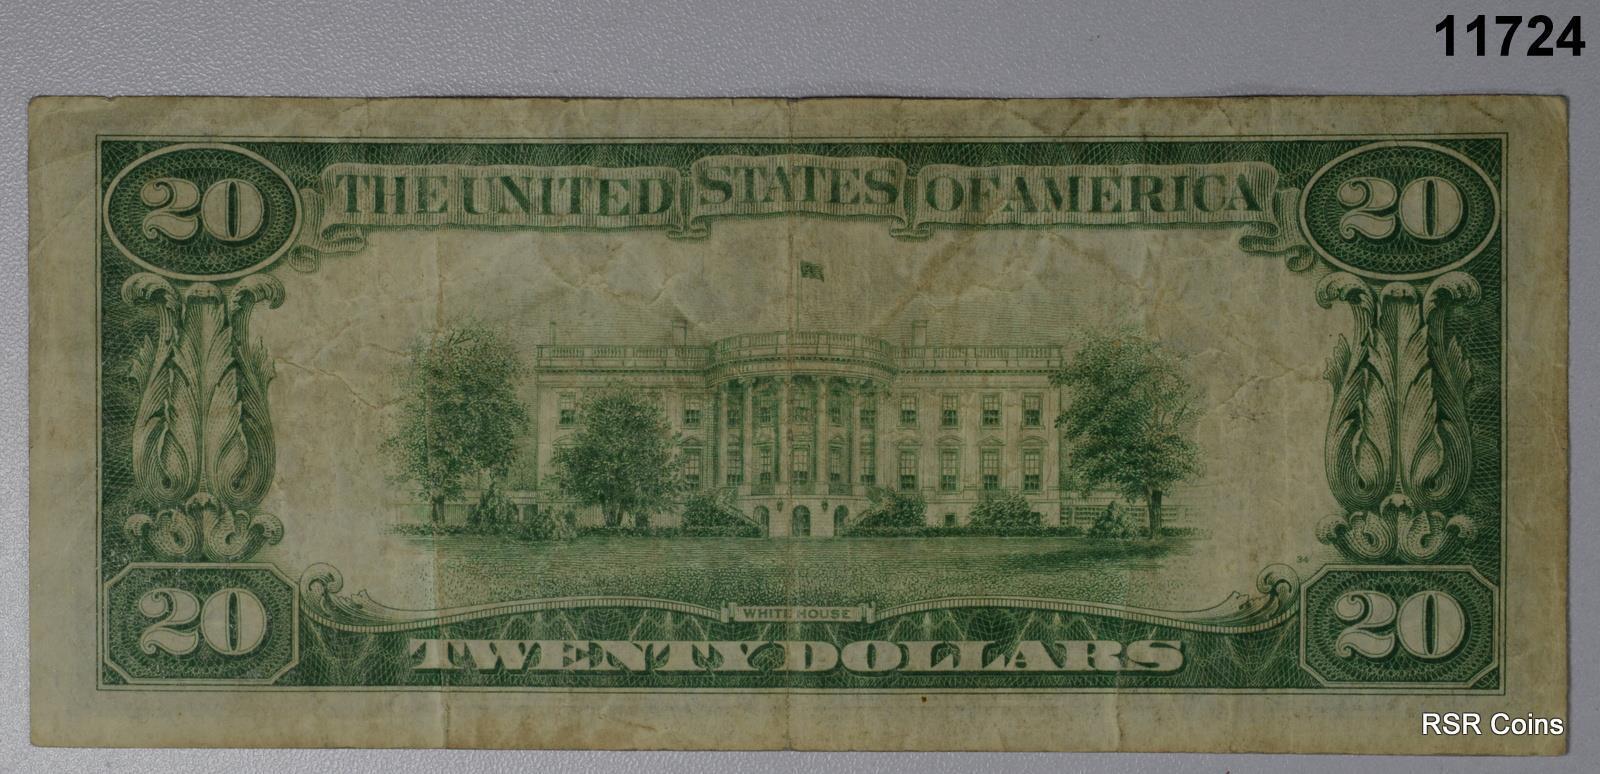 1928 B LIME GREEN "REDEEMABLE IN GOLD" BOSTON MASS FEDERAL RESERVE NOTE! #11724